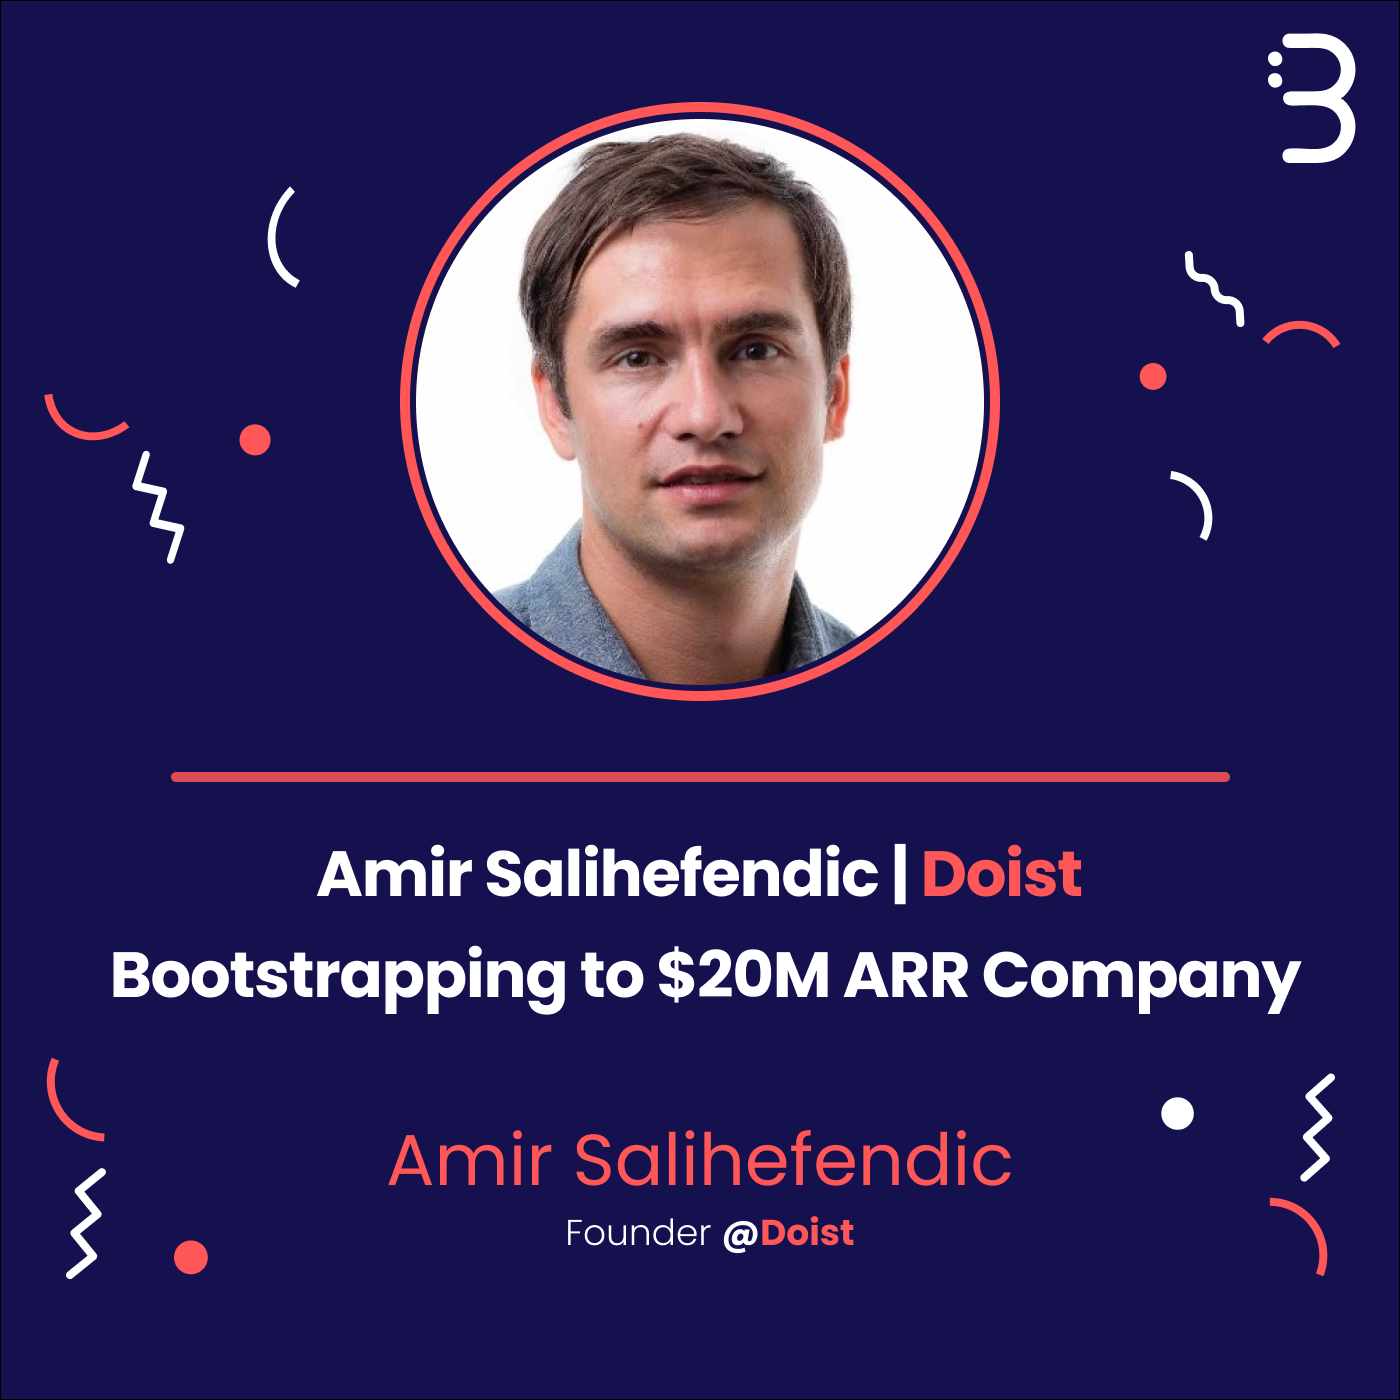 Amir Salihefendic | Doist – Bootstrapping to $20M ARR Company